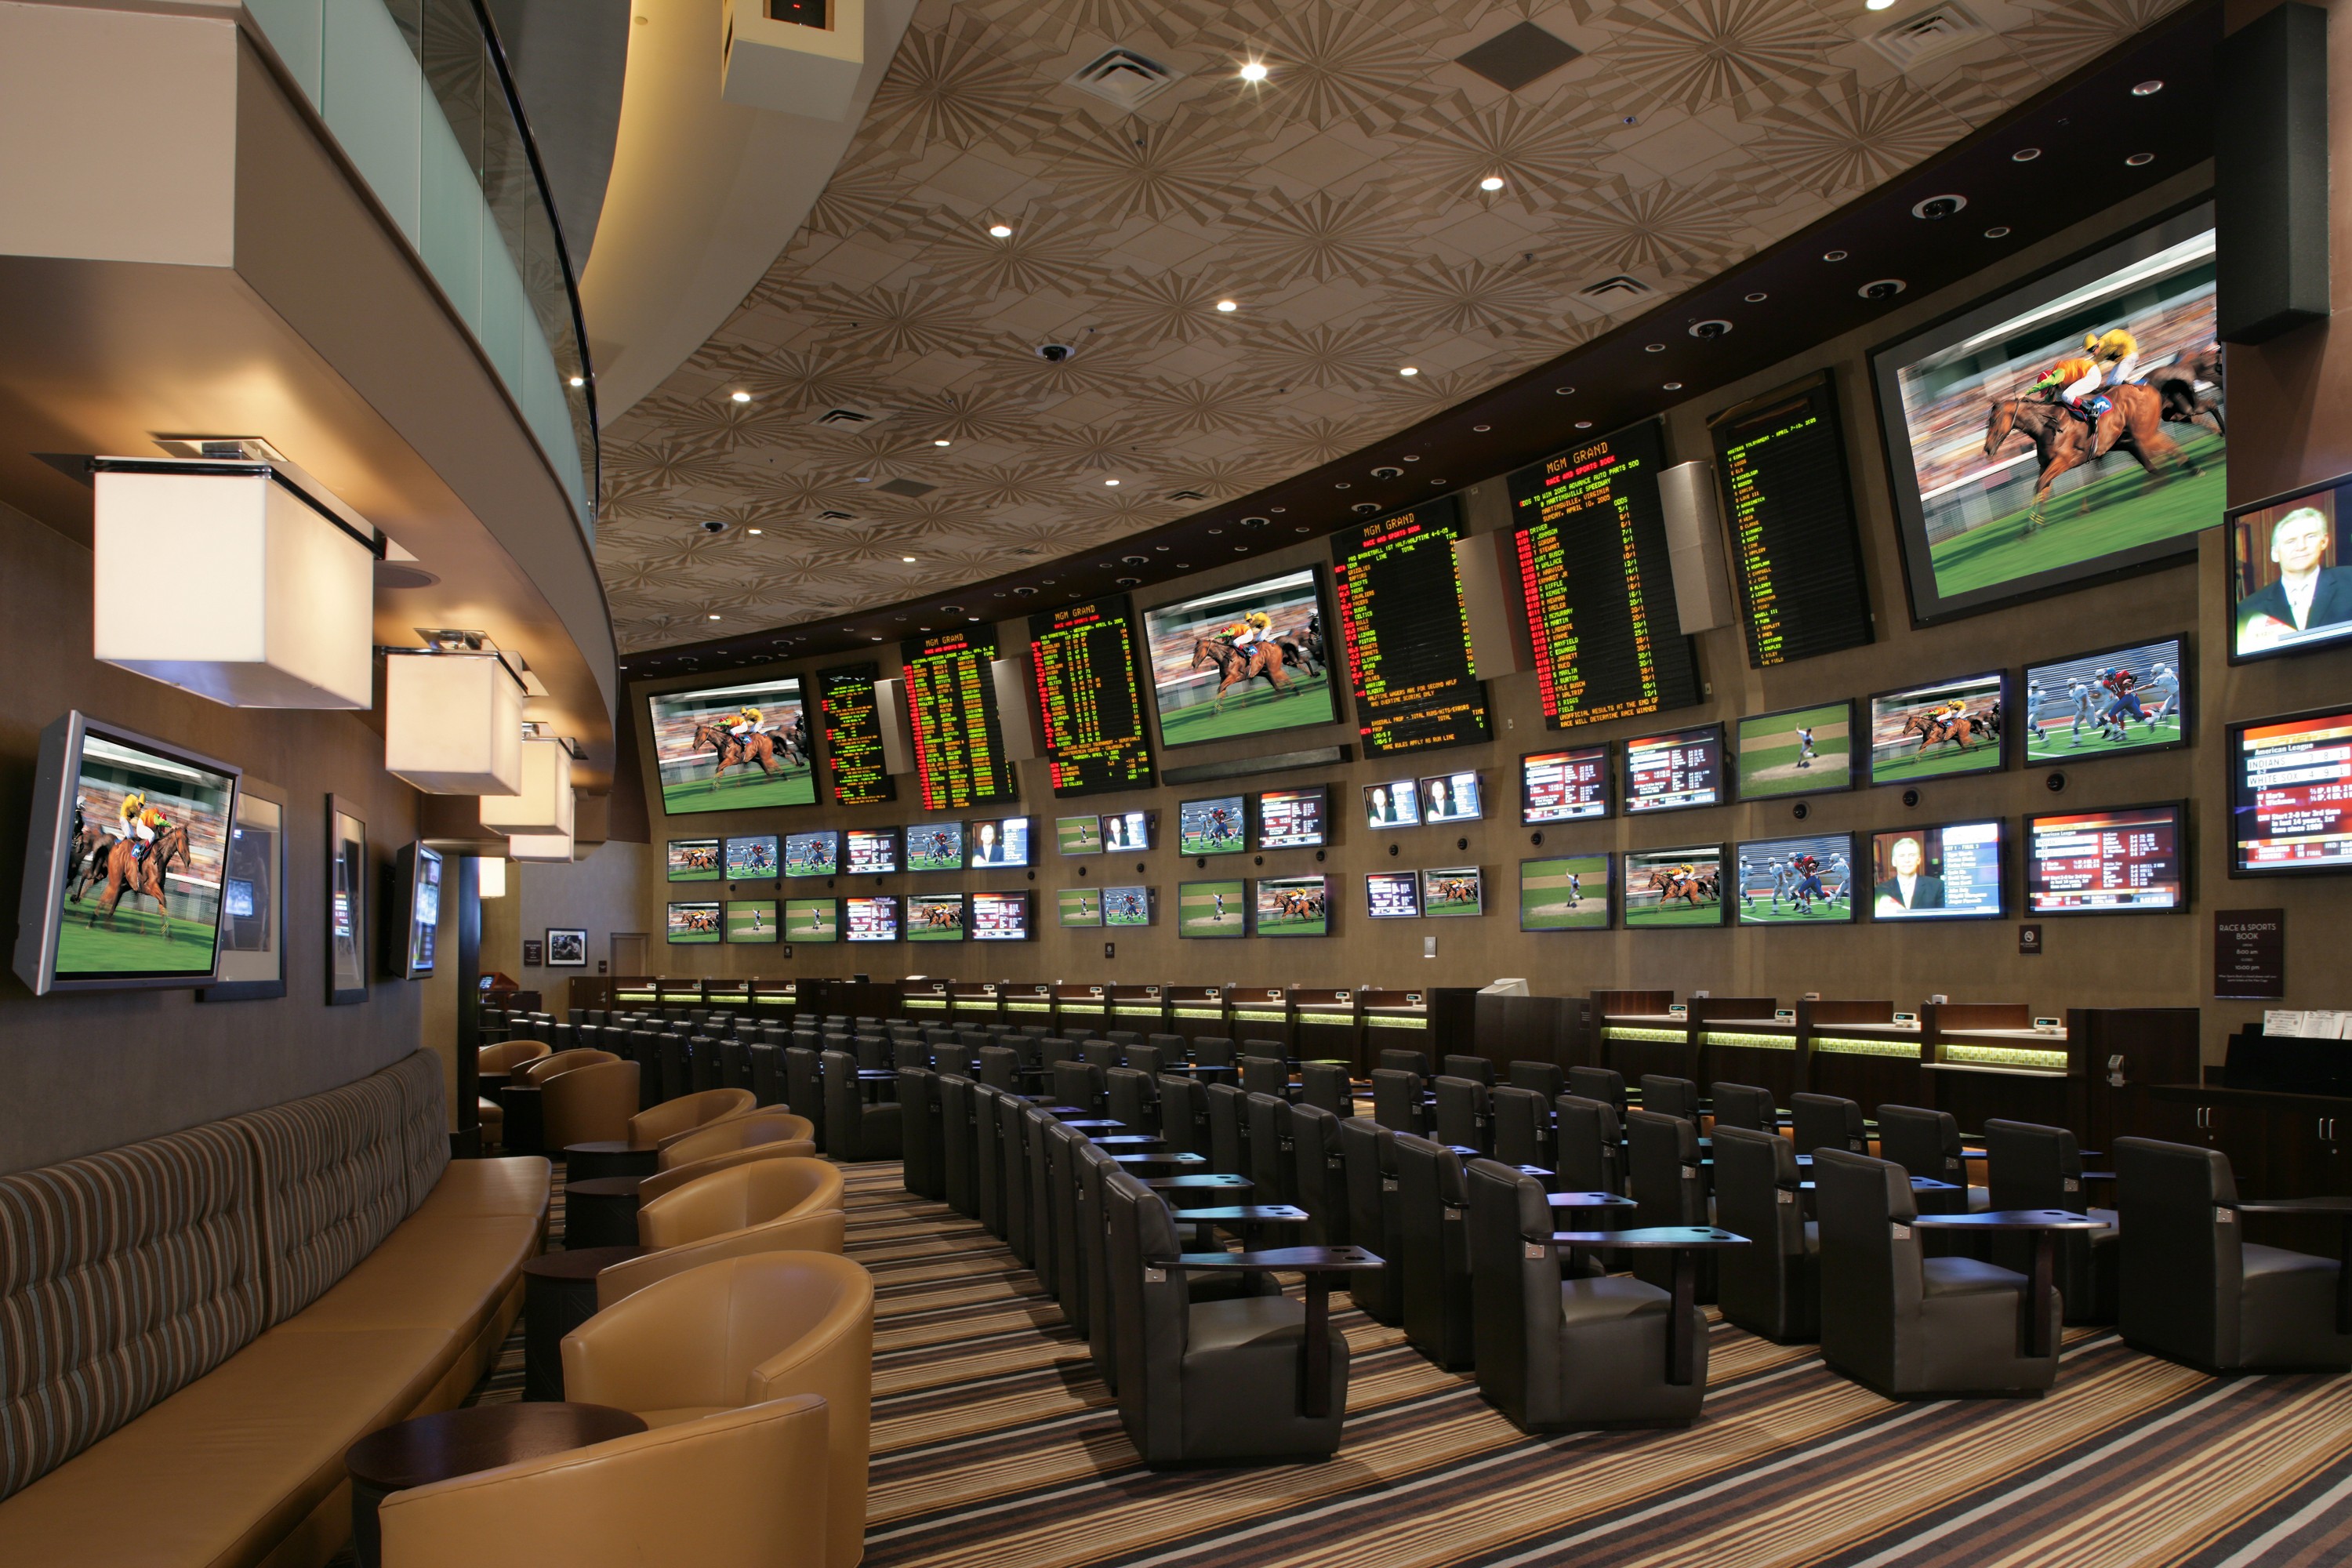 Sports Betting in Las Vegas | Pro Tips & Rules